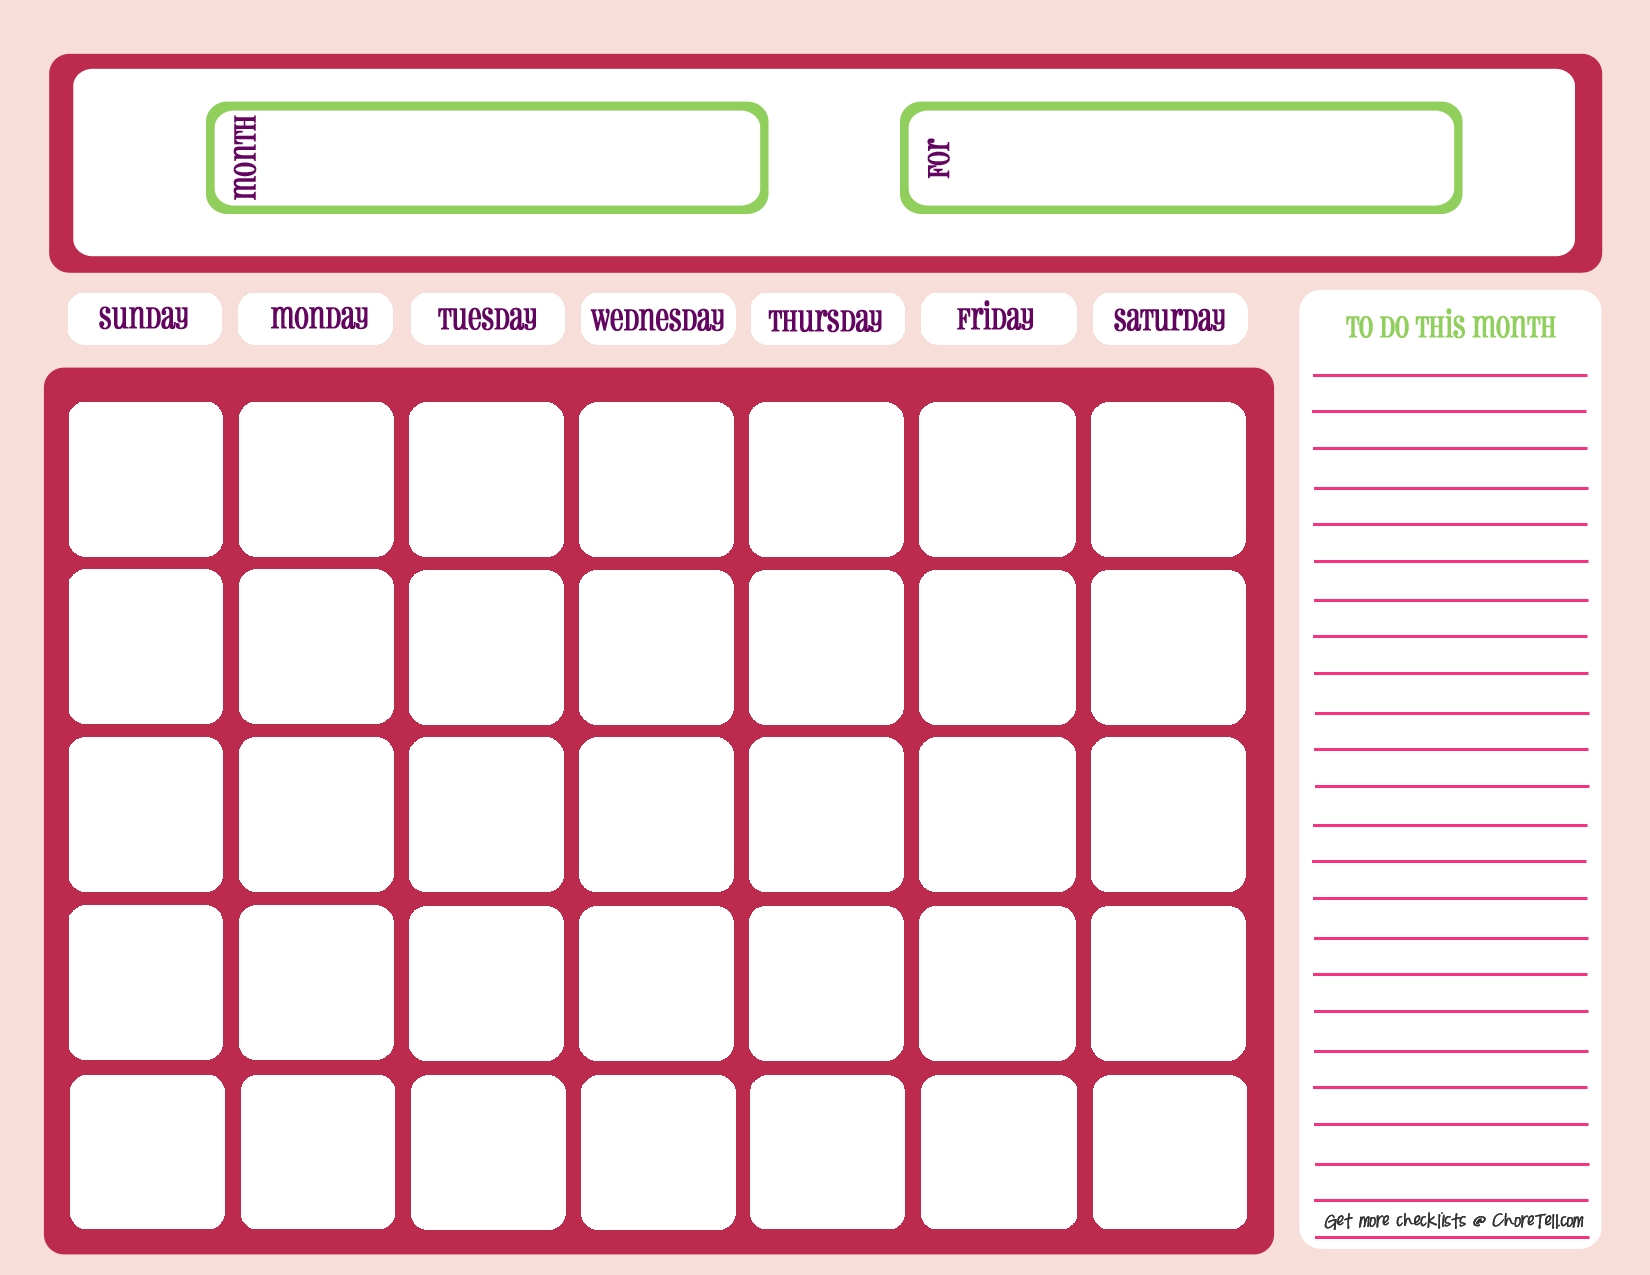 Blank Month Calendar - Pinks - Free Printable Downloads From Choretell pertaining to Blank Monthly Calendar Print Out